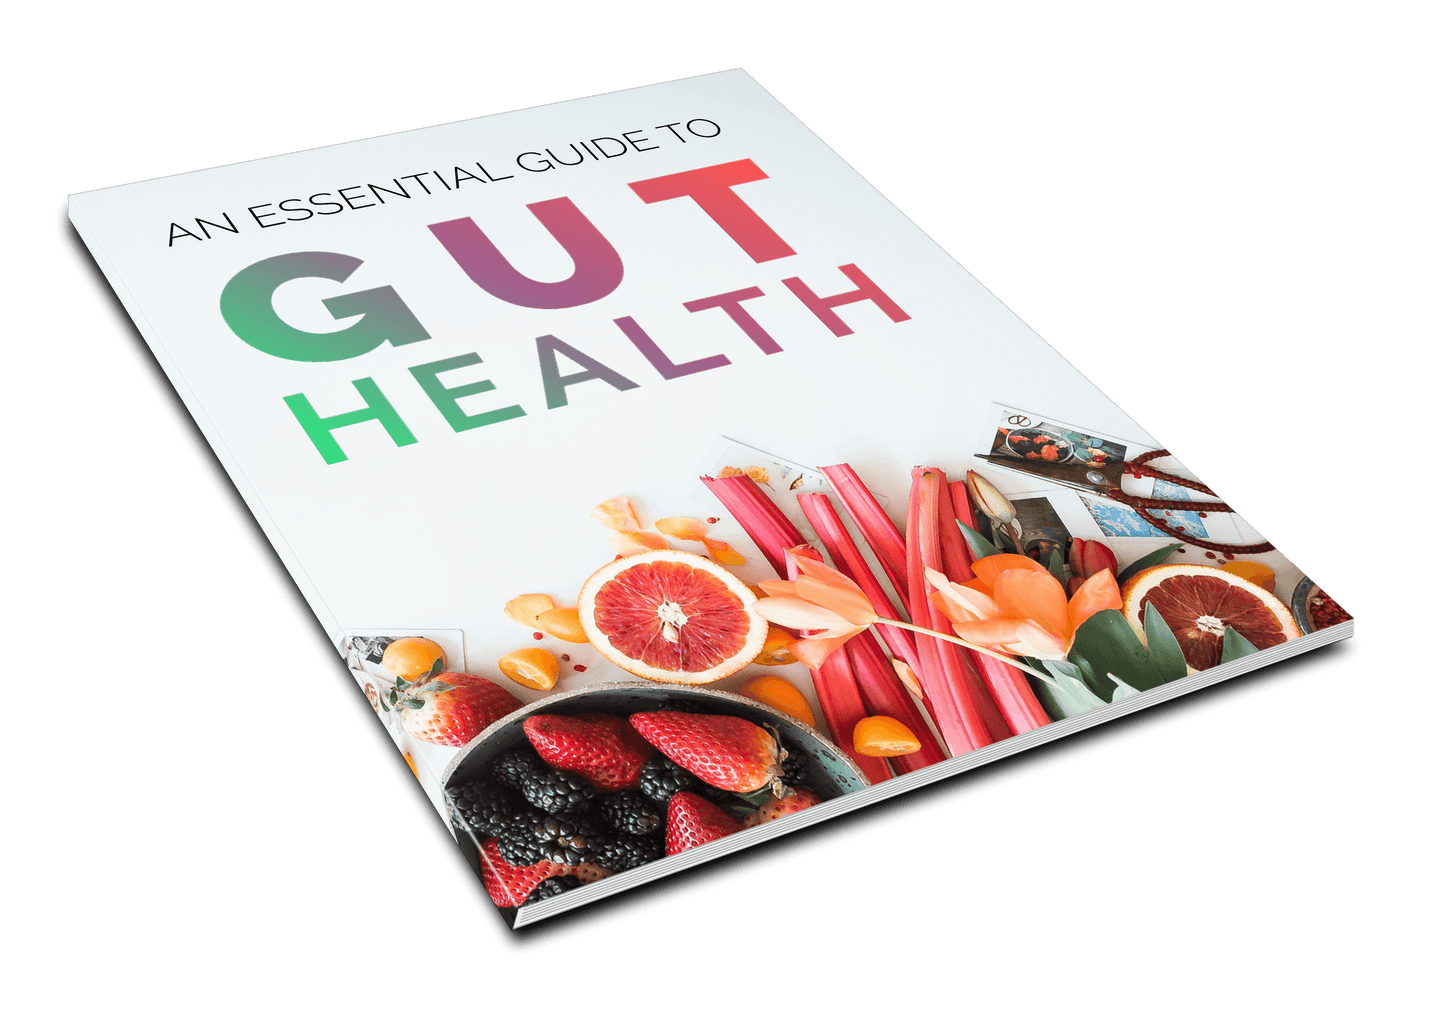 Ebook - An Essential Guide To Gut Health